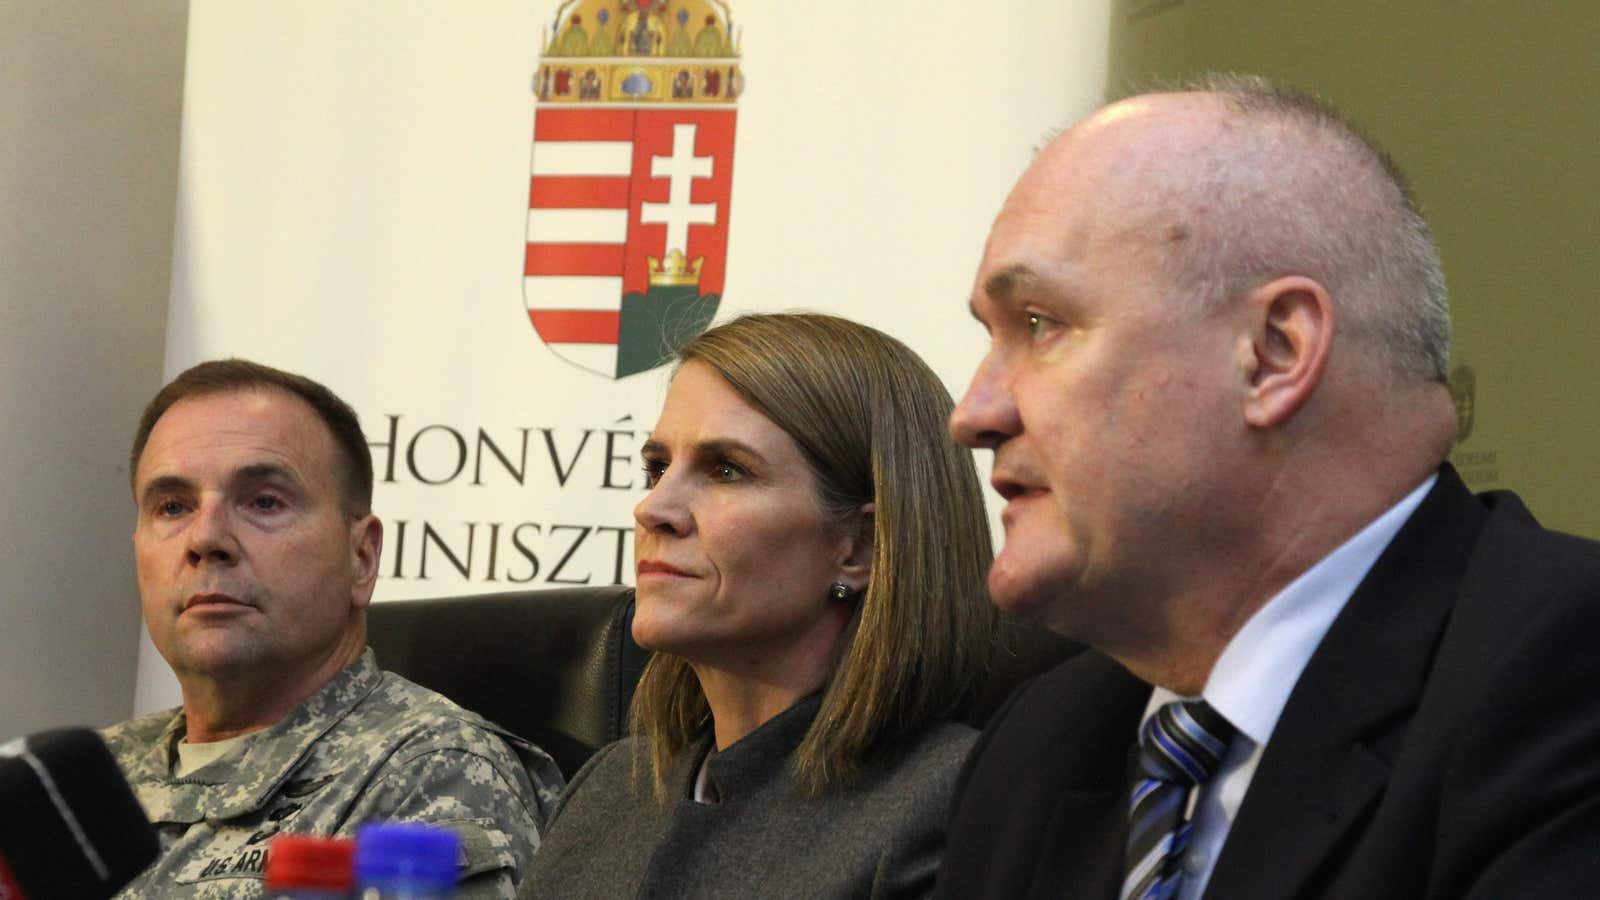 From left to right: U.S. Army Europe’s commander Lt. Gen. Frederick Hodges, United States Ambassador to Hungary Colleen Bell and Hungarian Defense Minister Csaba Hende as they give a press conference after attending the NATO military exercise. (AP Photo/Lajos Nagy)